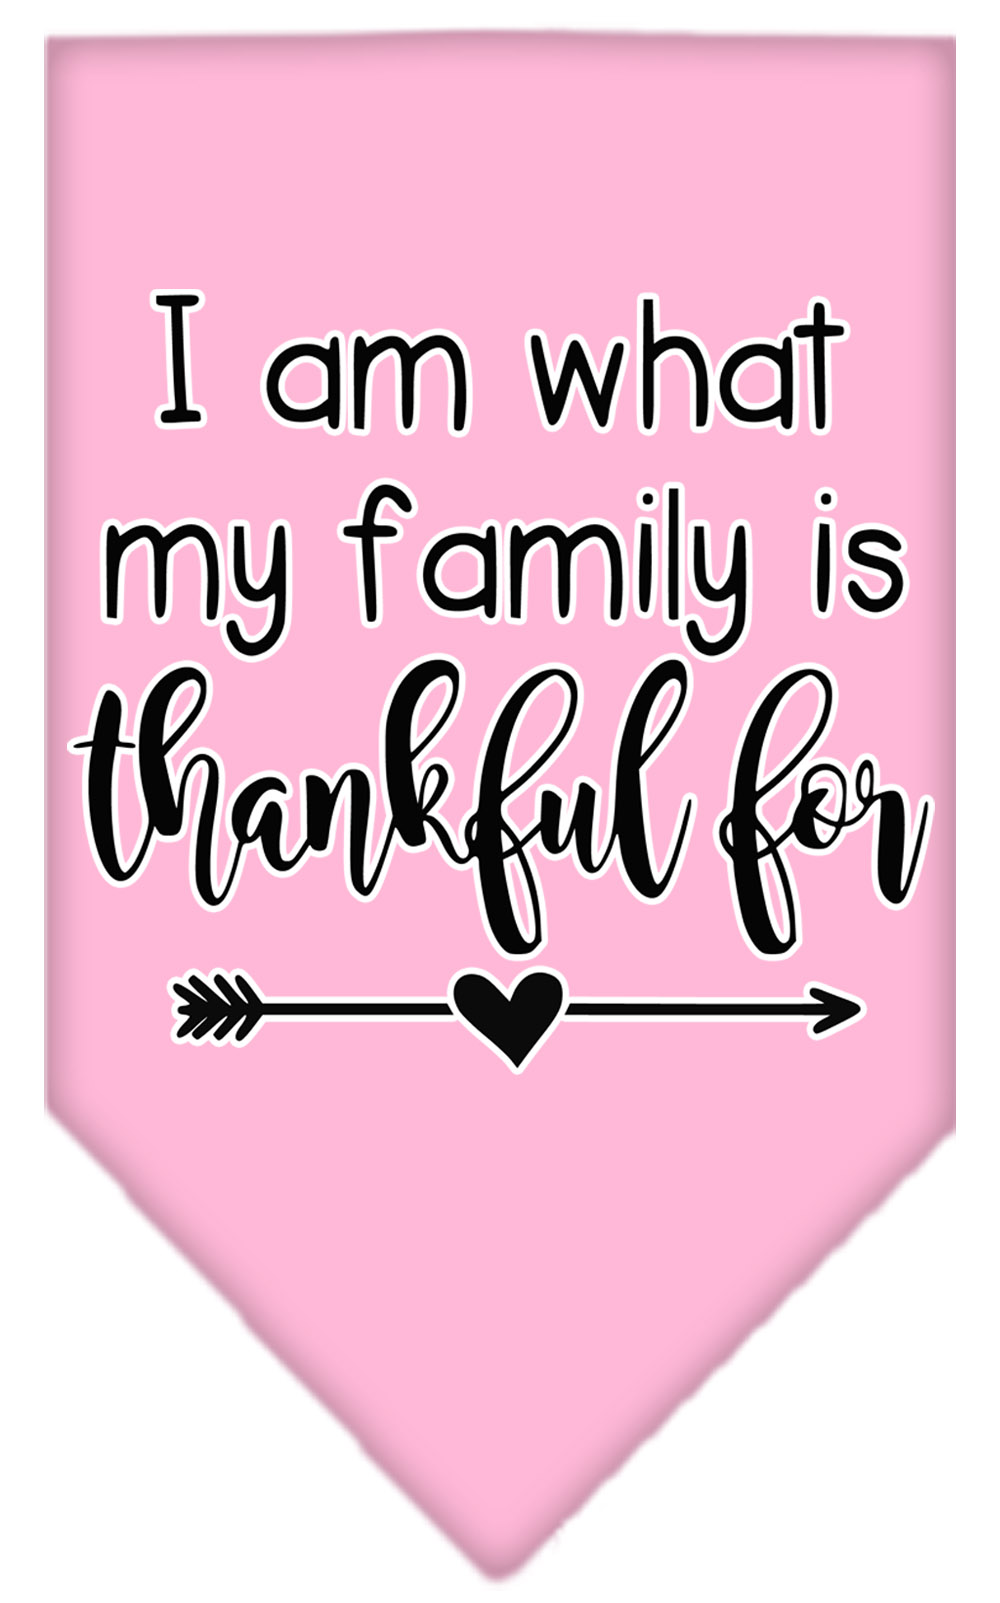 I Am What My Family is Thankful For Screen Print Bandana Light Pink Small